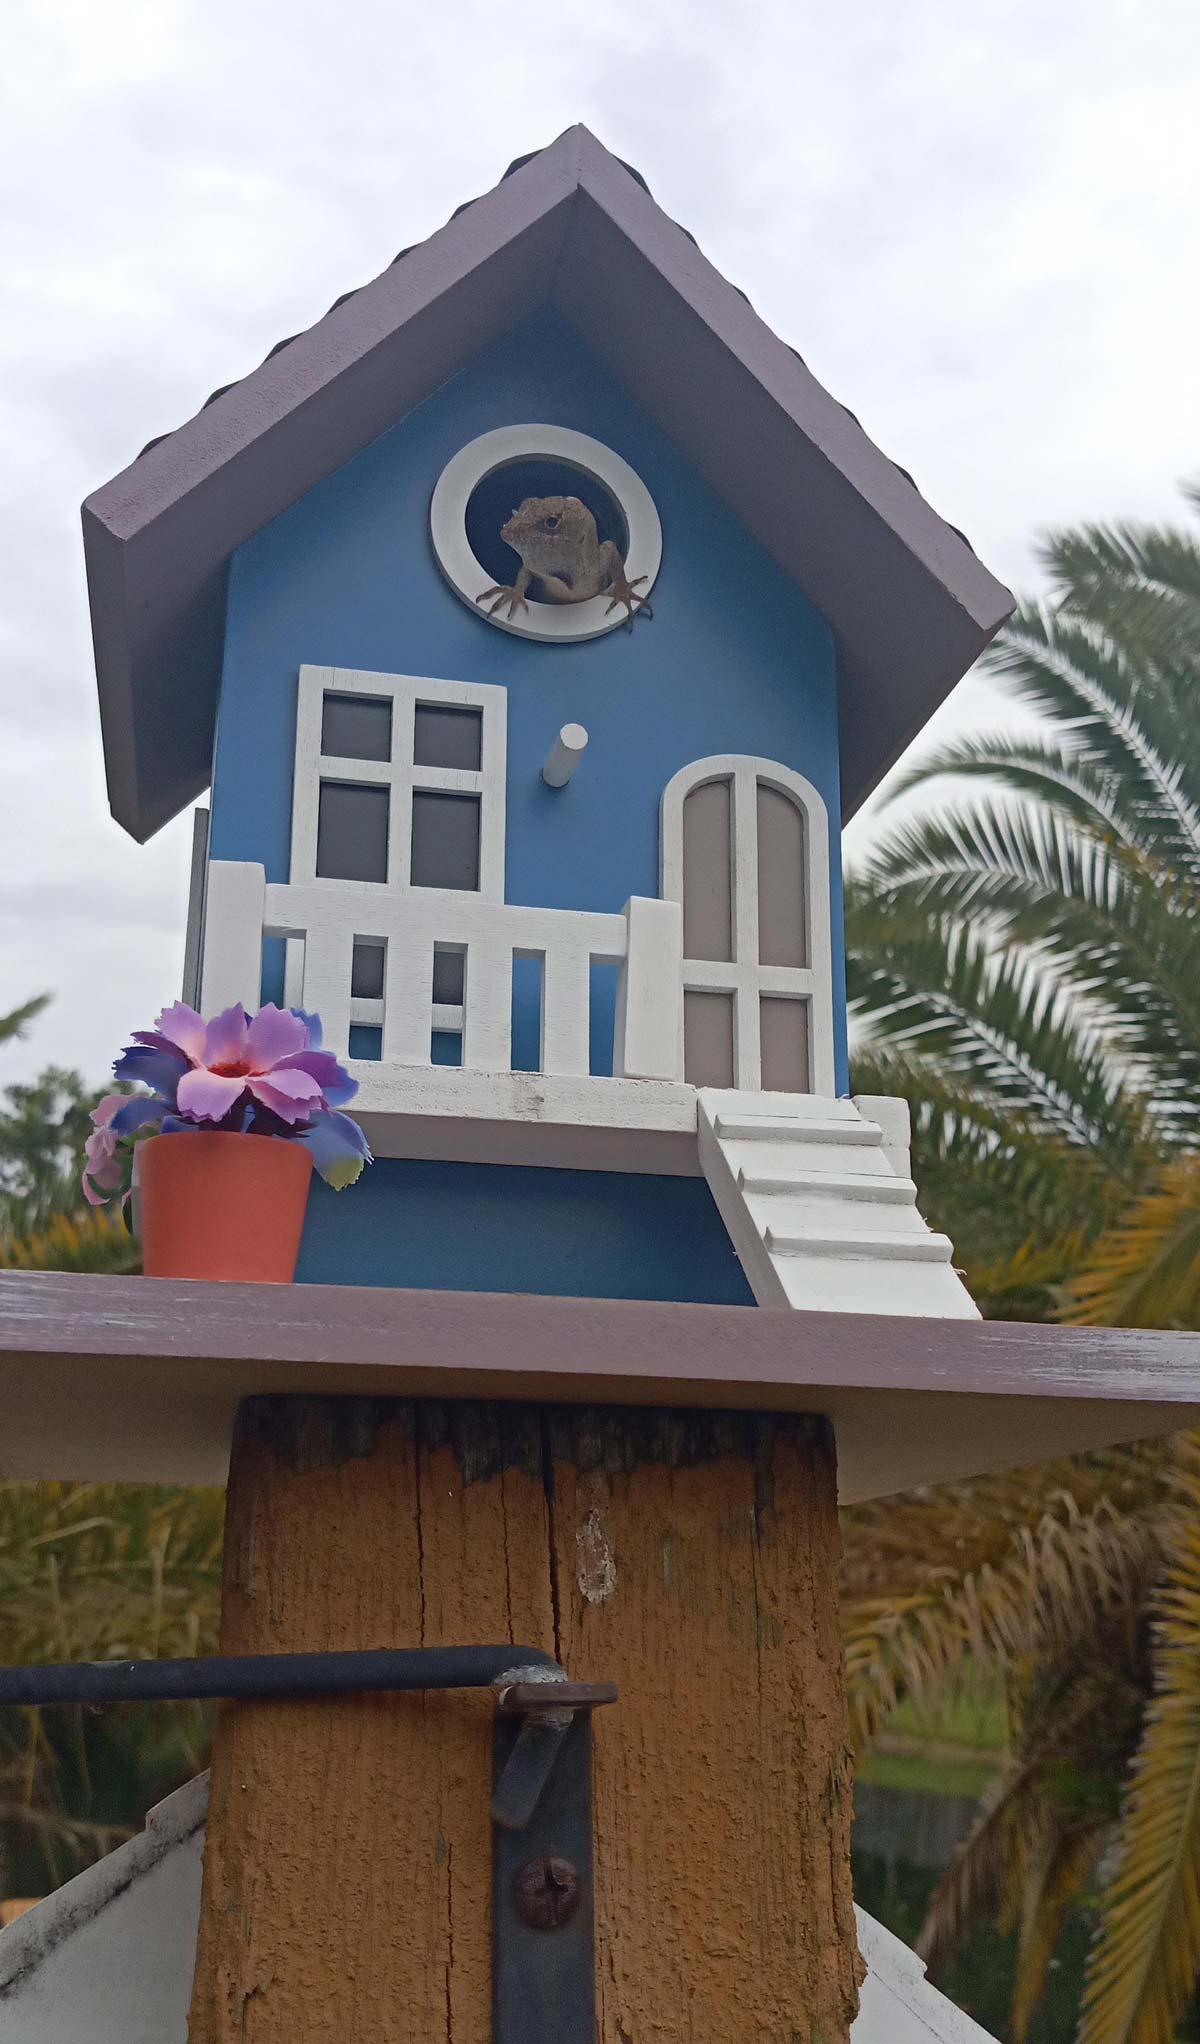 I put up a new birdhouse and got a tenant right away! Funny looking bird though..